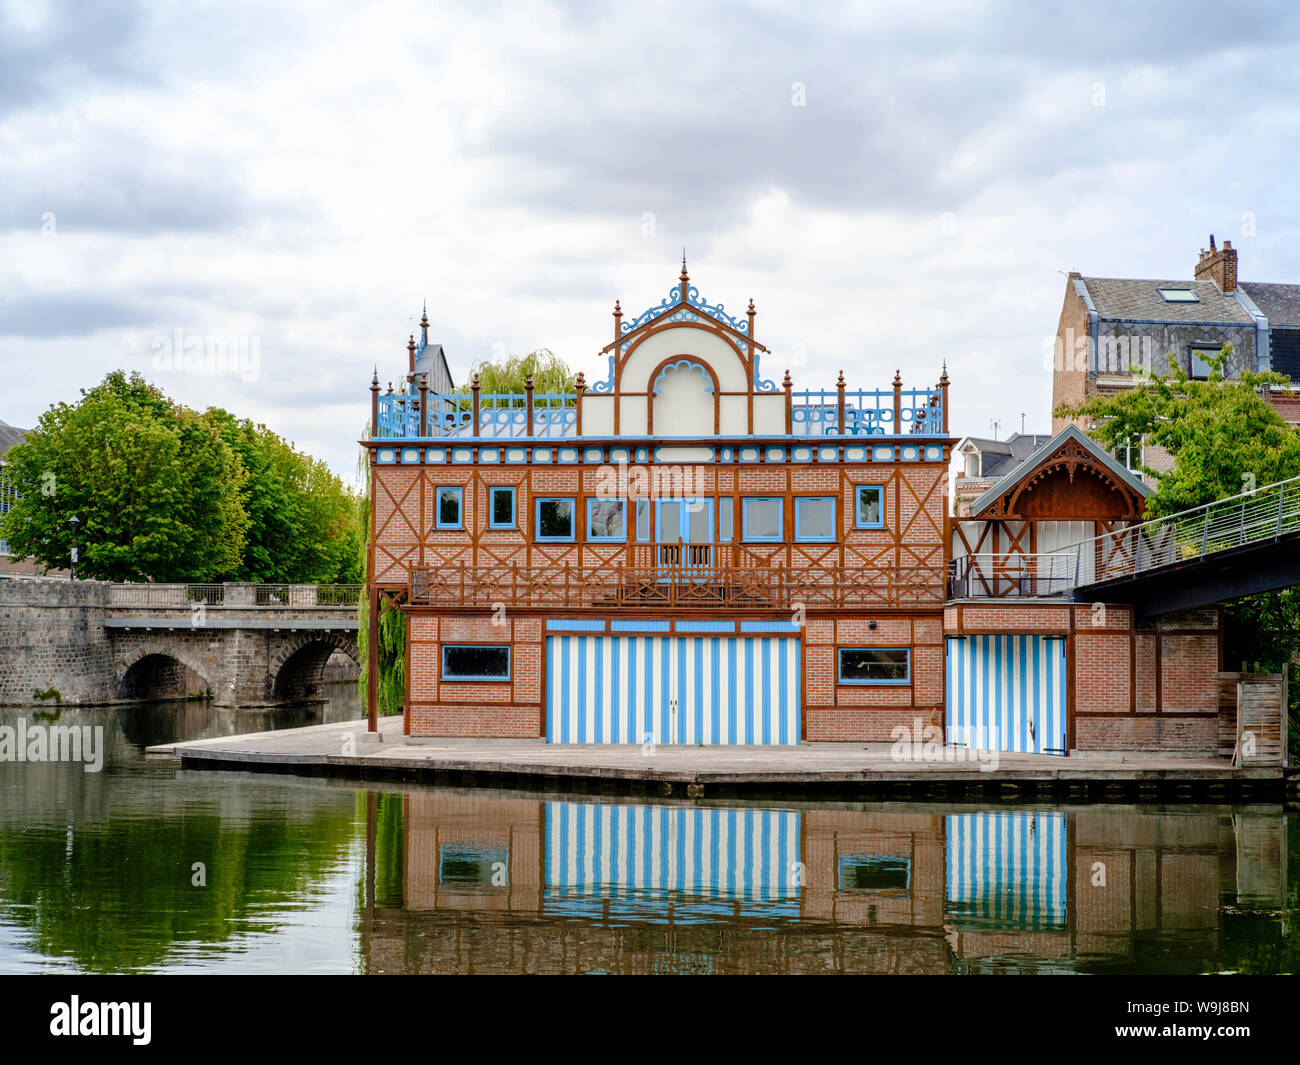 Centre Nautique (Boat Club) in Amiens, Picardy, France Stock Photo